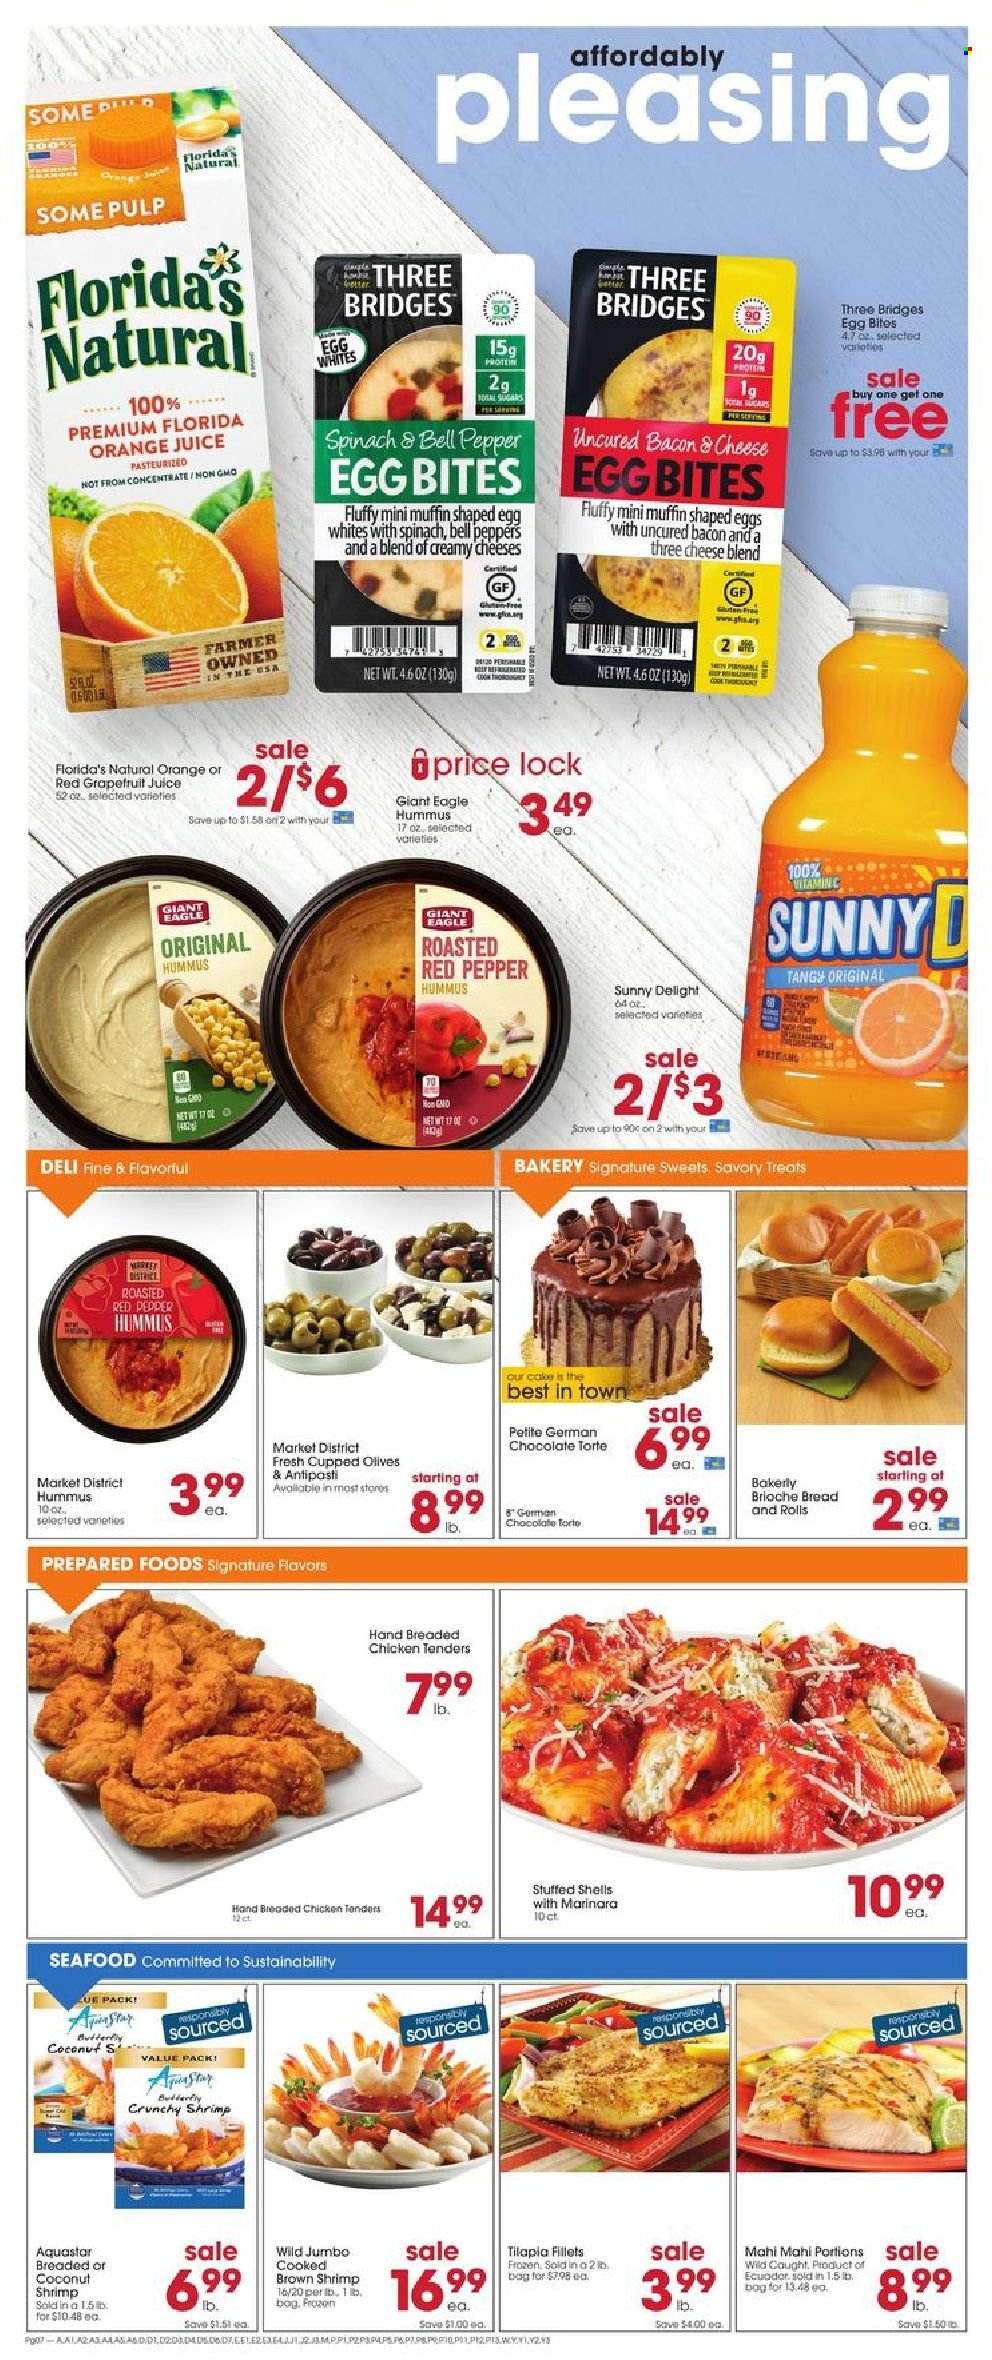 thumbnail - Giant Eagle Flyer - 09/16/2021 - 09/22/2021 - Sales products - bread, cake, brioche, muffin, mahi mahi, tilapia, seafood, shrimps, fried chicken, bacon, hummus, eggs, chocolate, Florida's Natural, olives, orange juice, juice, vitamin c. Page 6.